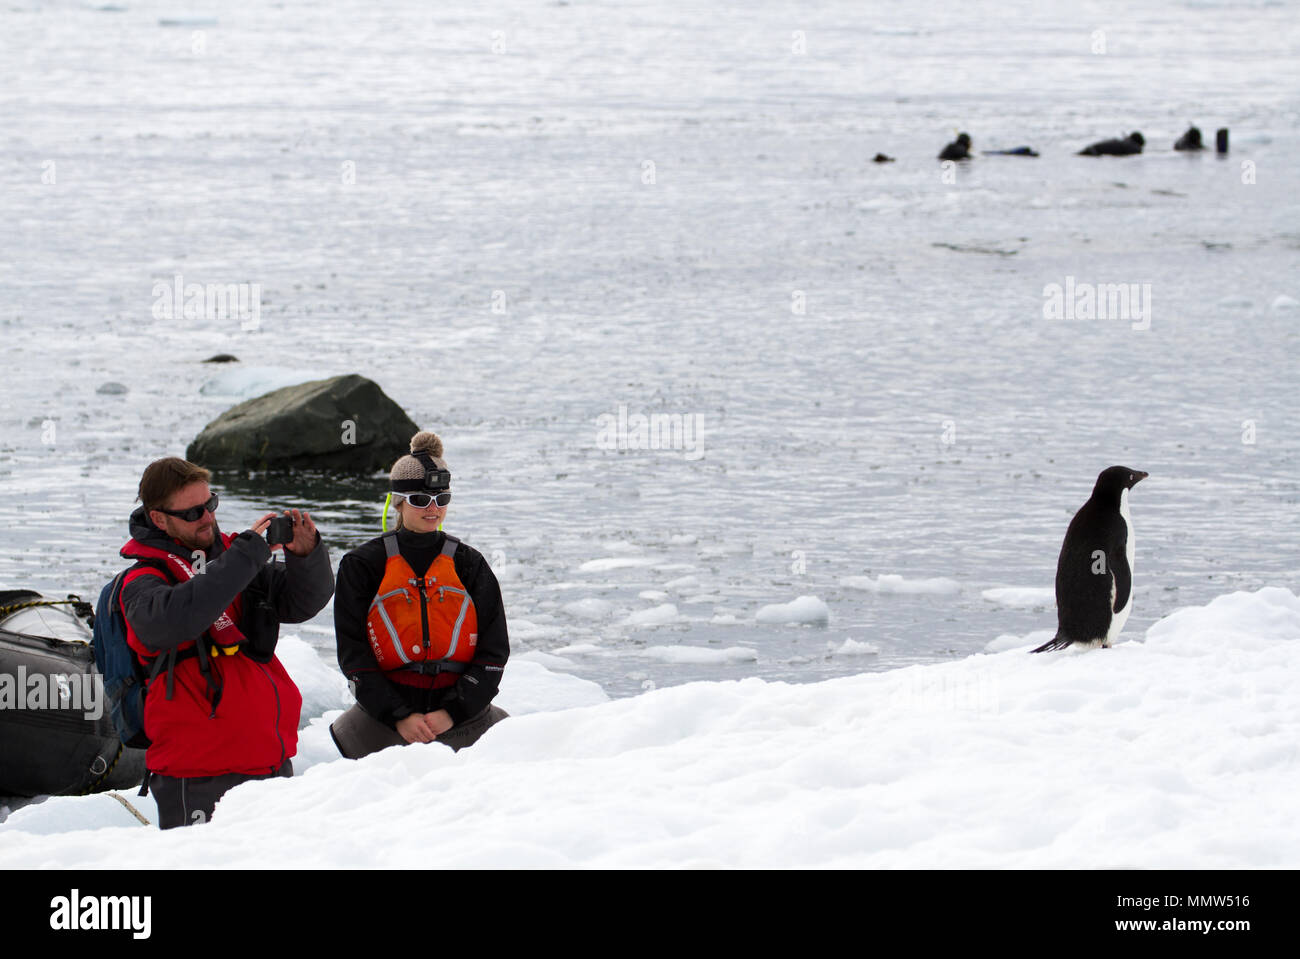 Mikkelsen Harbour, Antarctica - December 21, 2016: A man and a woman watching and taking a photograph of an Adelie Penguin (Pygoscelis adeliae) while  Stock Photo